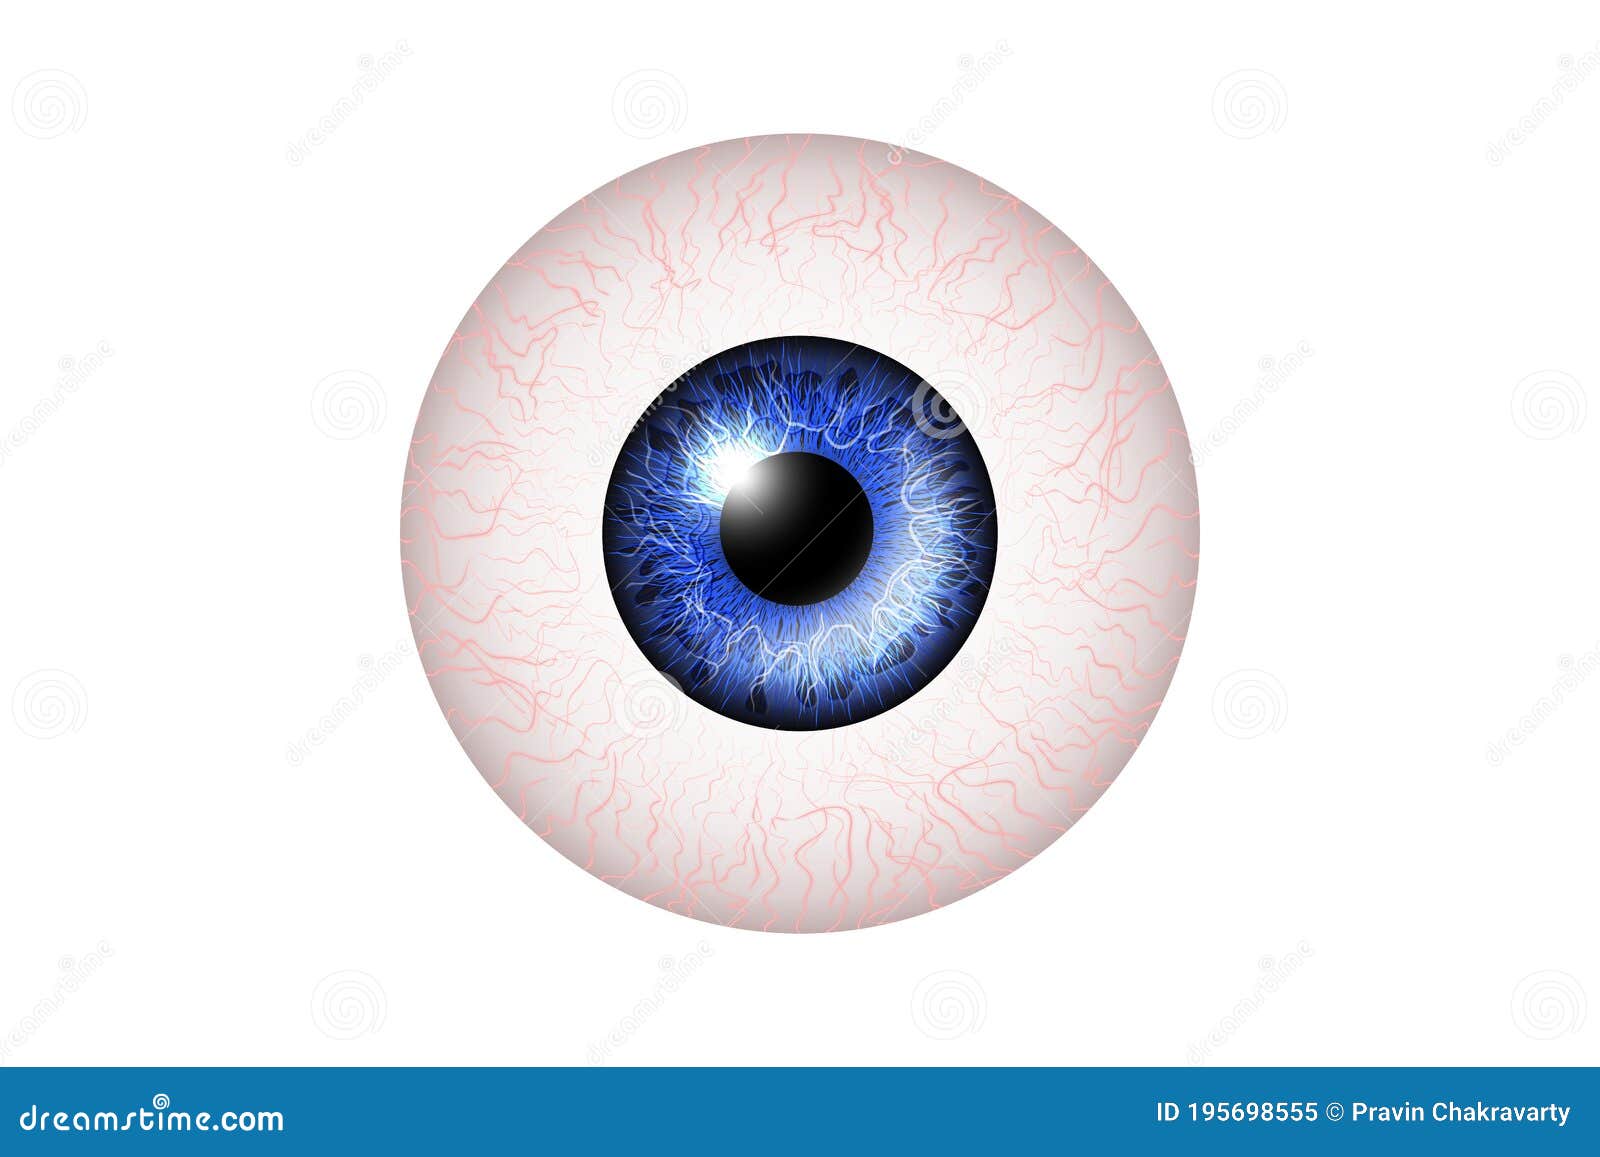 414,241 One Blue Eye Images, Stock Photos, 3D objects, & Vectors